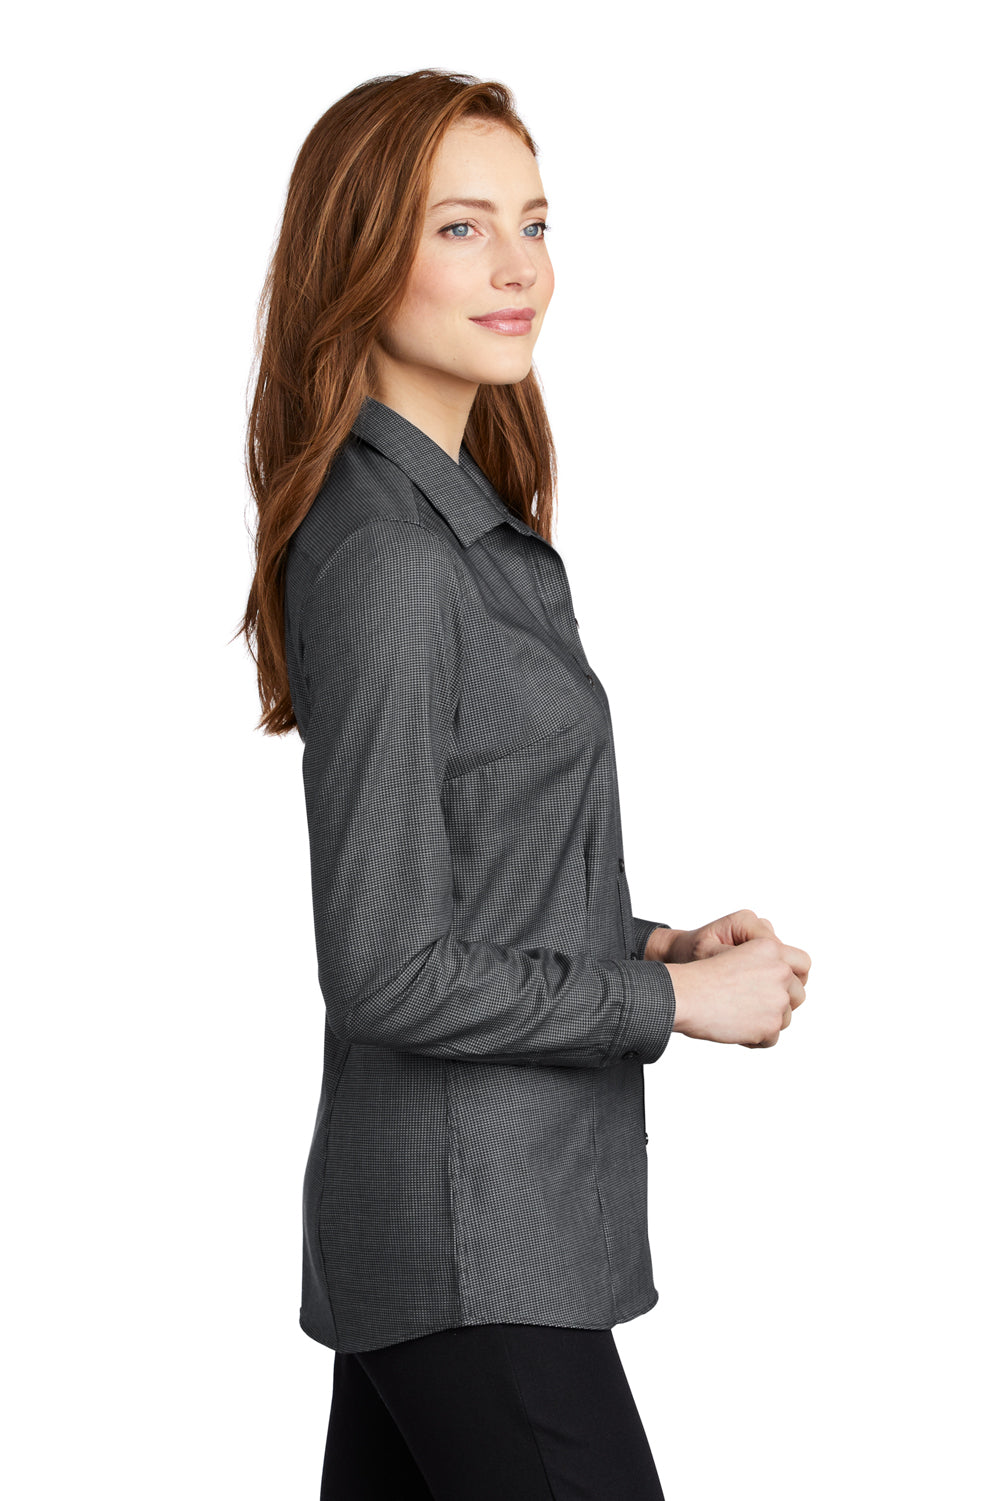 Port Authority Womens Pincheck Long Sleeve Button Down Shirt Black/Steel Grey Side